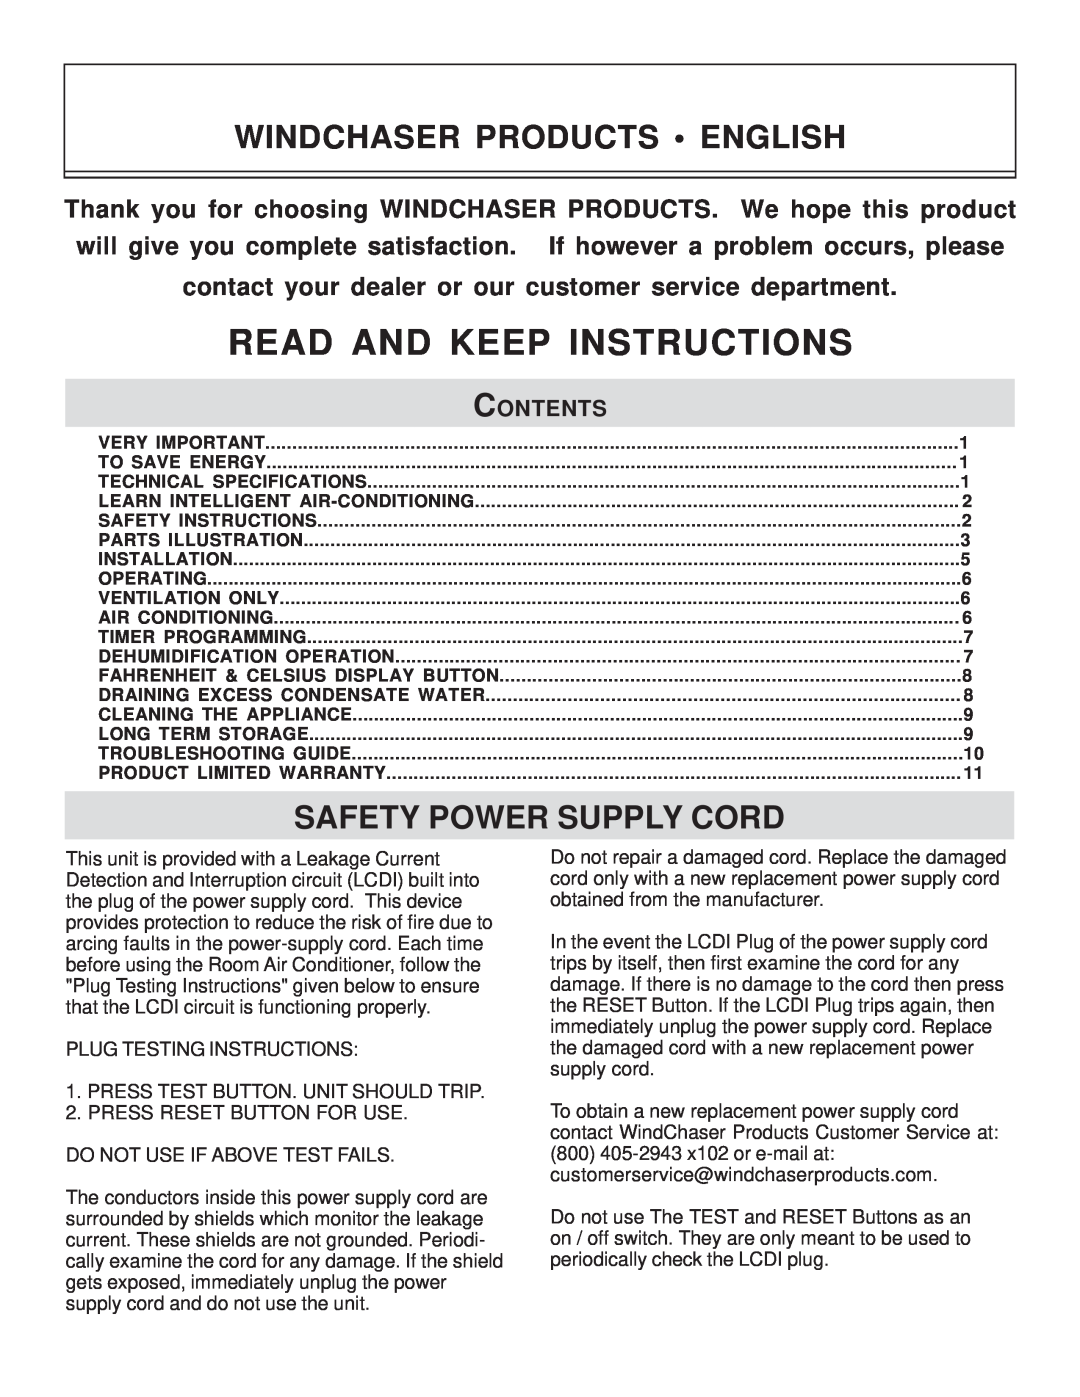 WindChaser Products PACR9S Windchaser Products English, Safety Power Supply Cord, Read And Keep Instructions, Contents 